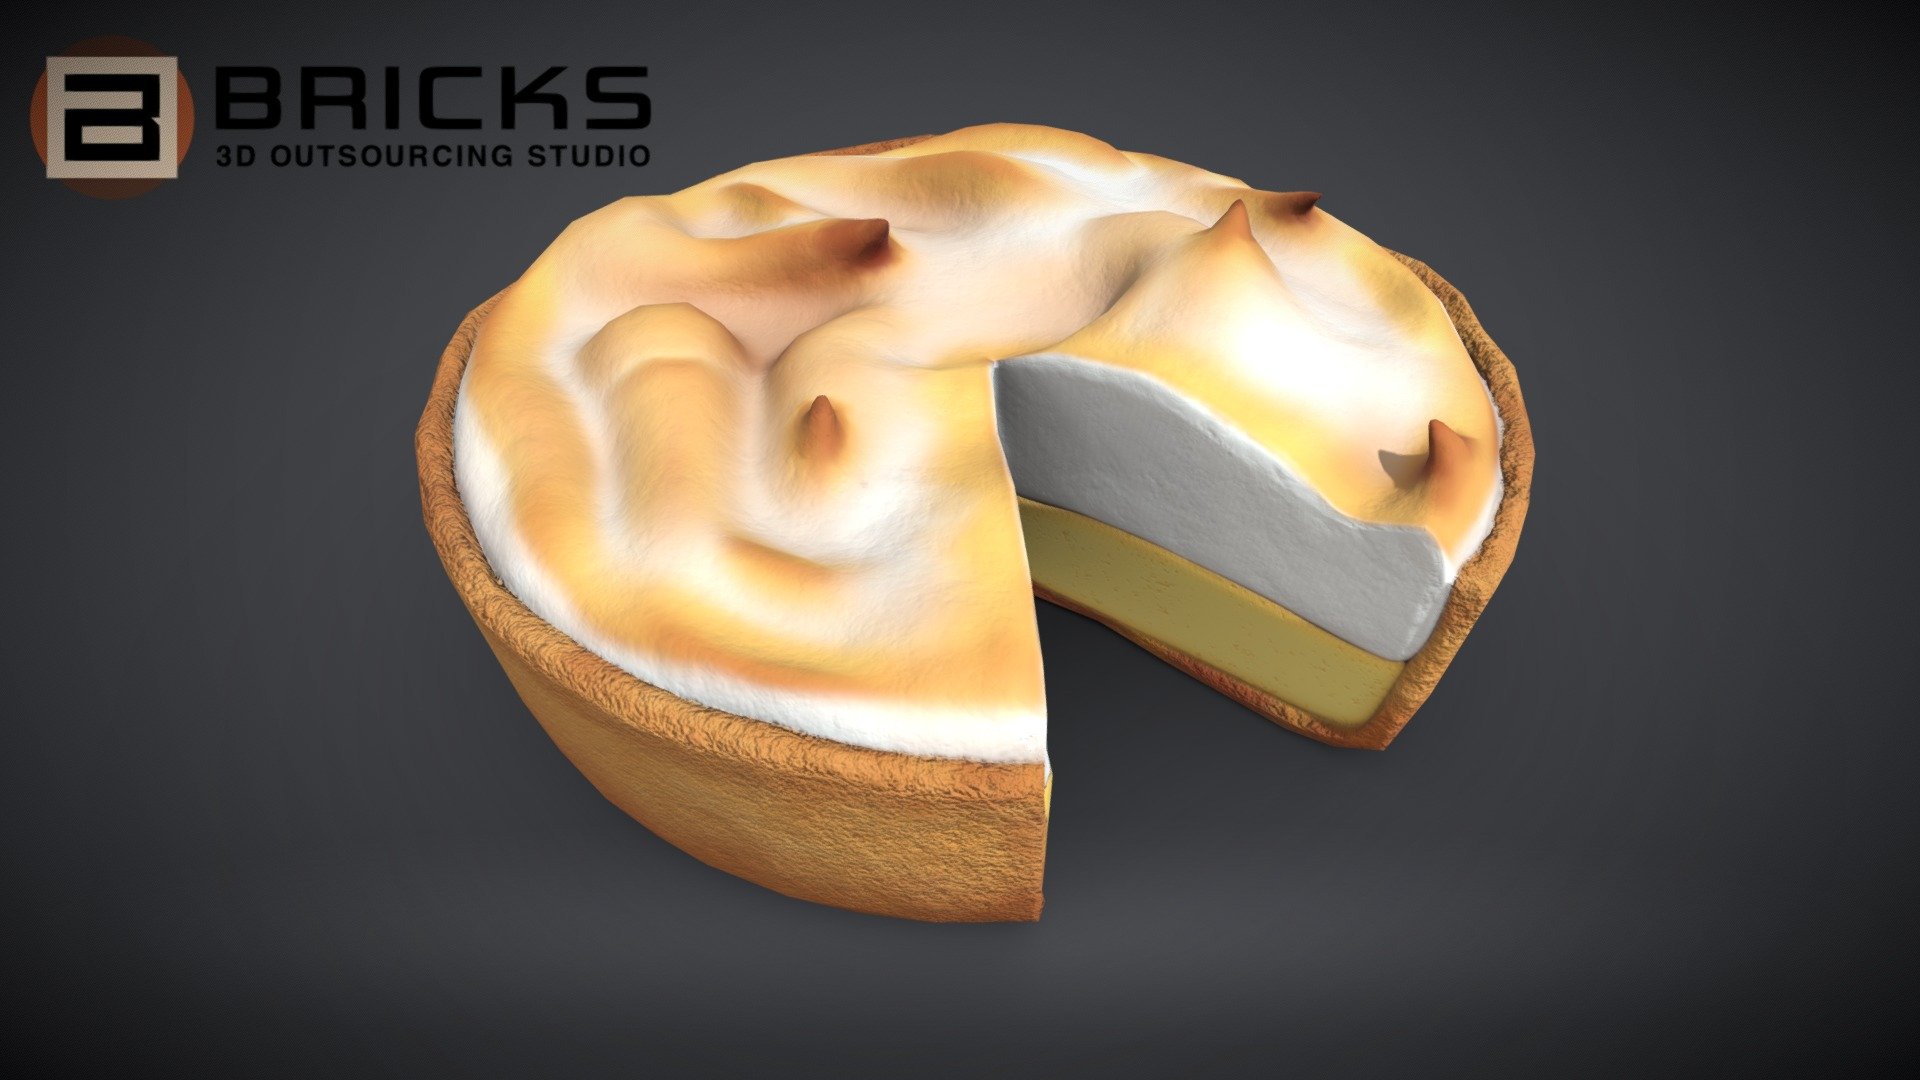 PBR Food Asset:
GrahamPie_Chart
Polycount: 1610
Vertex count: 807
Texture Size: 2048px x 2048px
Normal: OpenGL

If you need any adjust in file please contact us: team@bricks3dstudio.com

Hire us: tringuyen@bricks3dstudio.com
Here is us: https://www.bricks3dstudio.com/
        https://www.artstation.com/bricksstudio
        https://www.facebook.com/Bricks3dstudio/
        https://www.linkedin.com/in/bricks-studio-b10462252/ - GrahamPieChart - Buy Royalty Free 3D model by Bricks Studio (@bricks3dstudio) 3d model